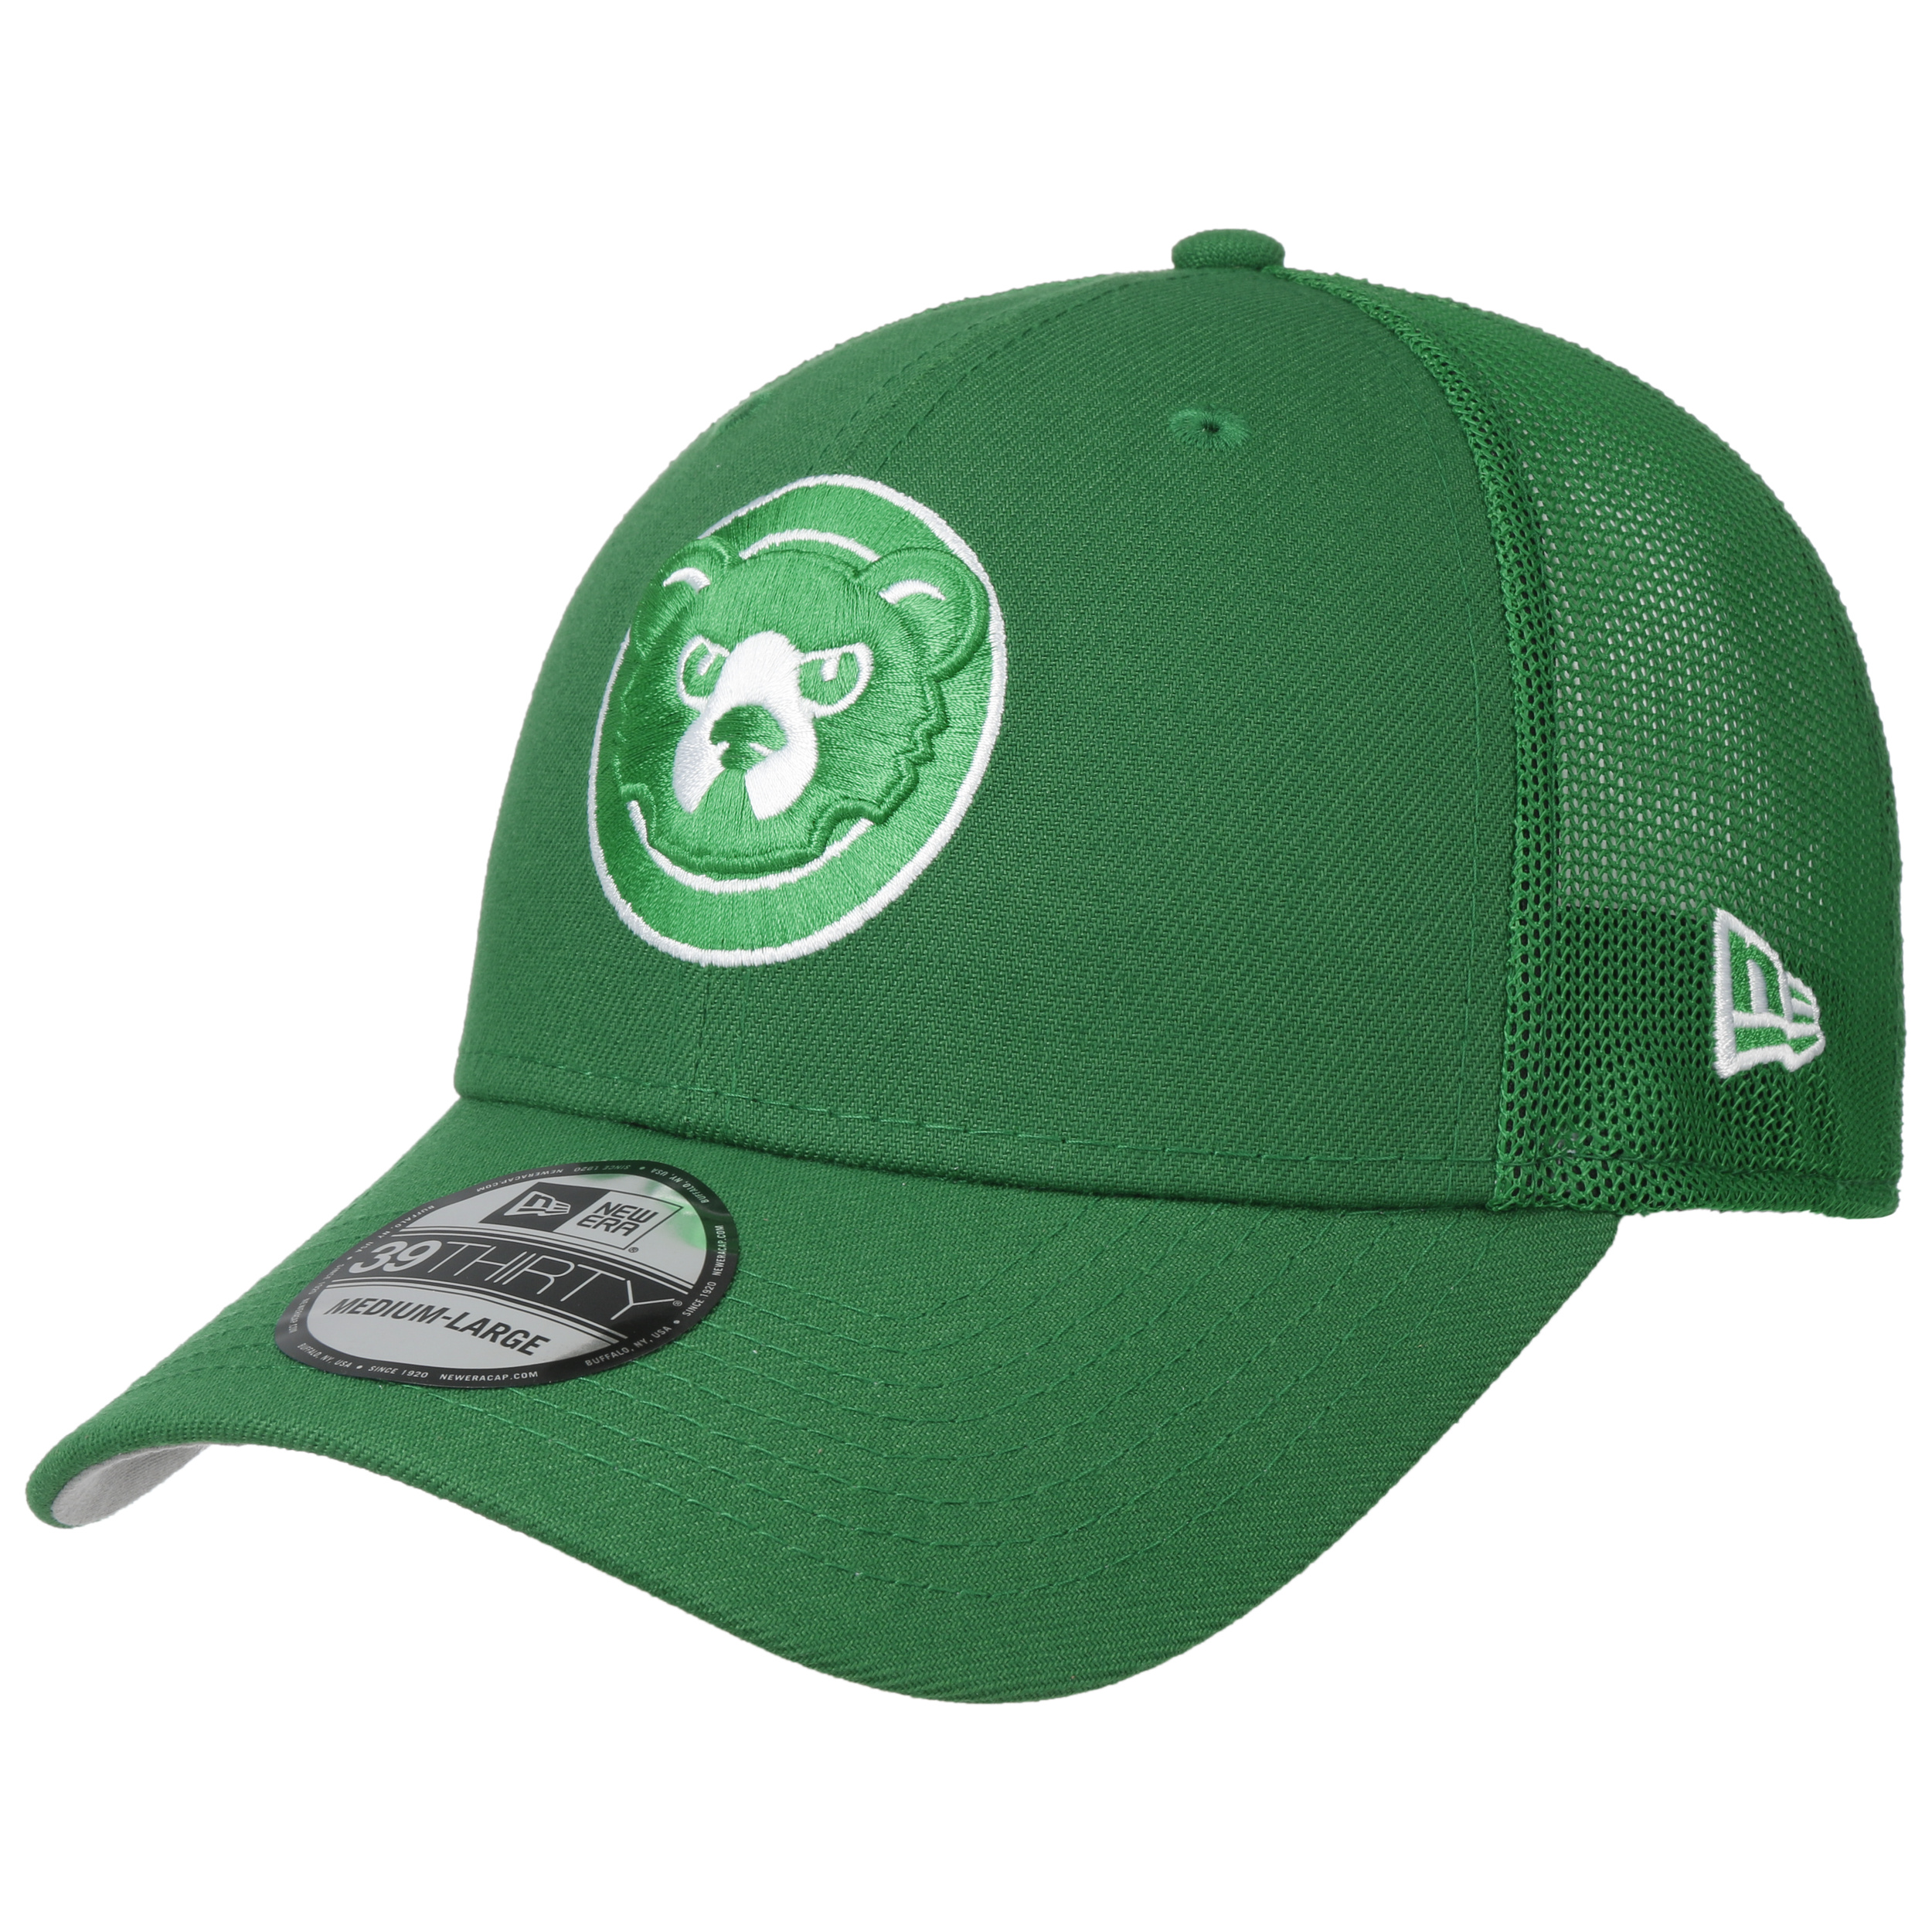 MLB22 ST Pats Chicago Cubs Pet by New Era - 34,95 €